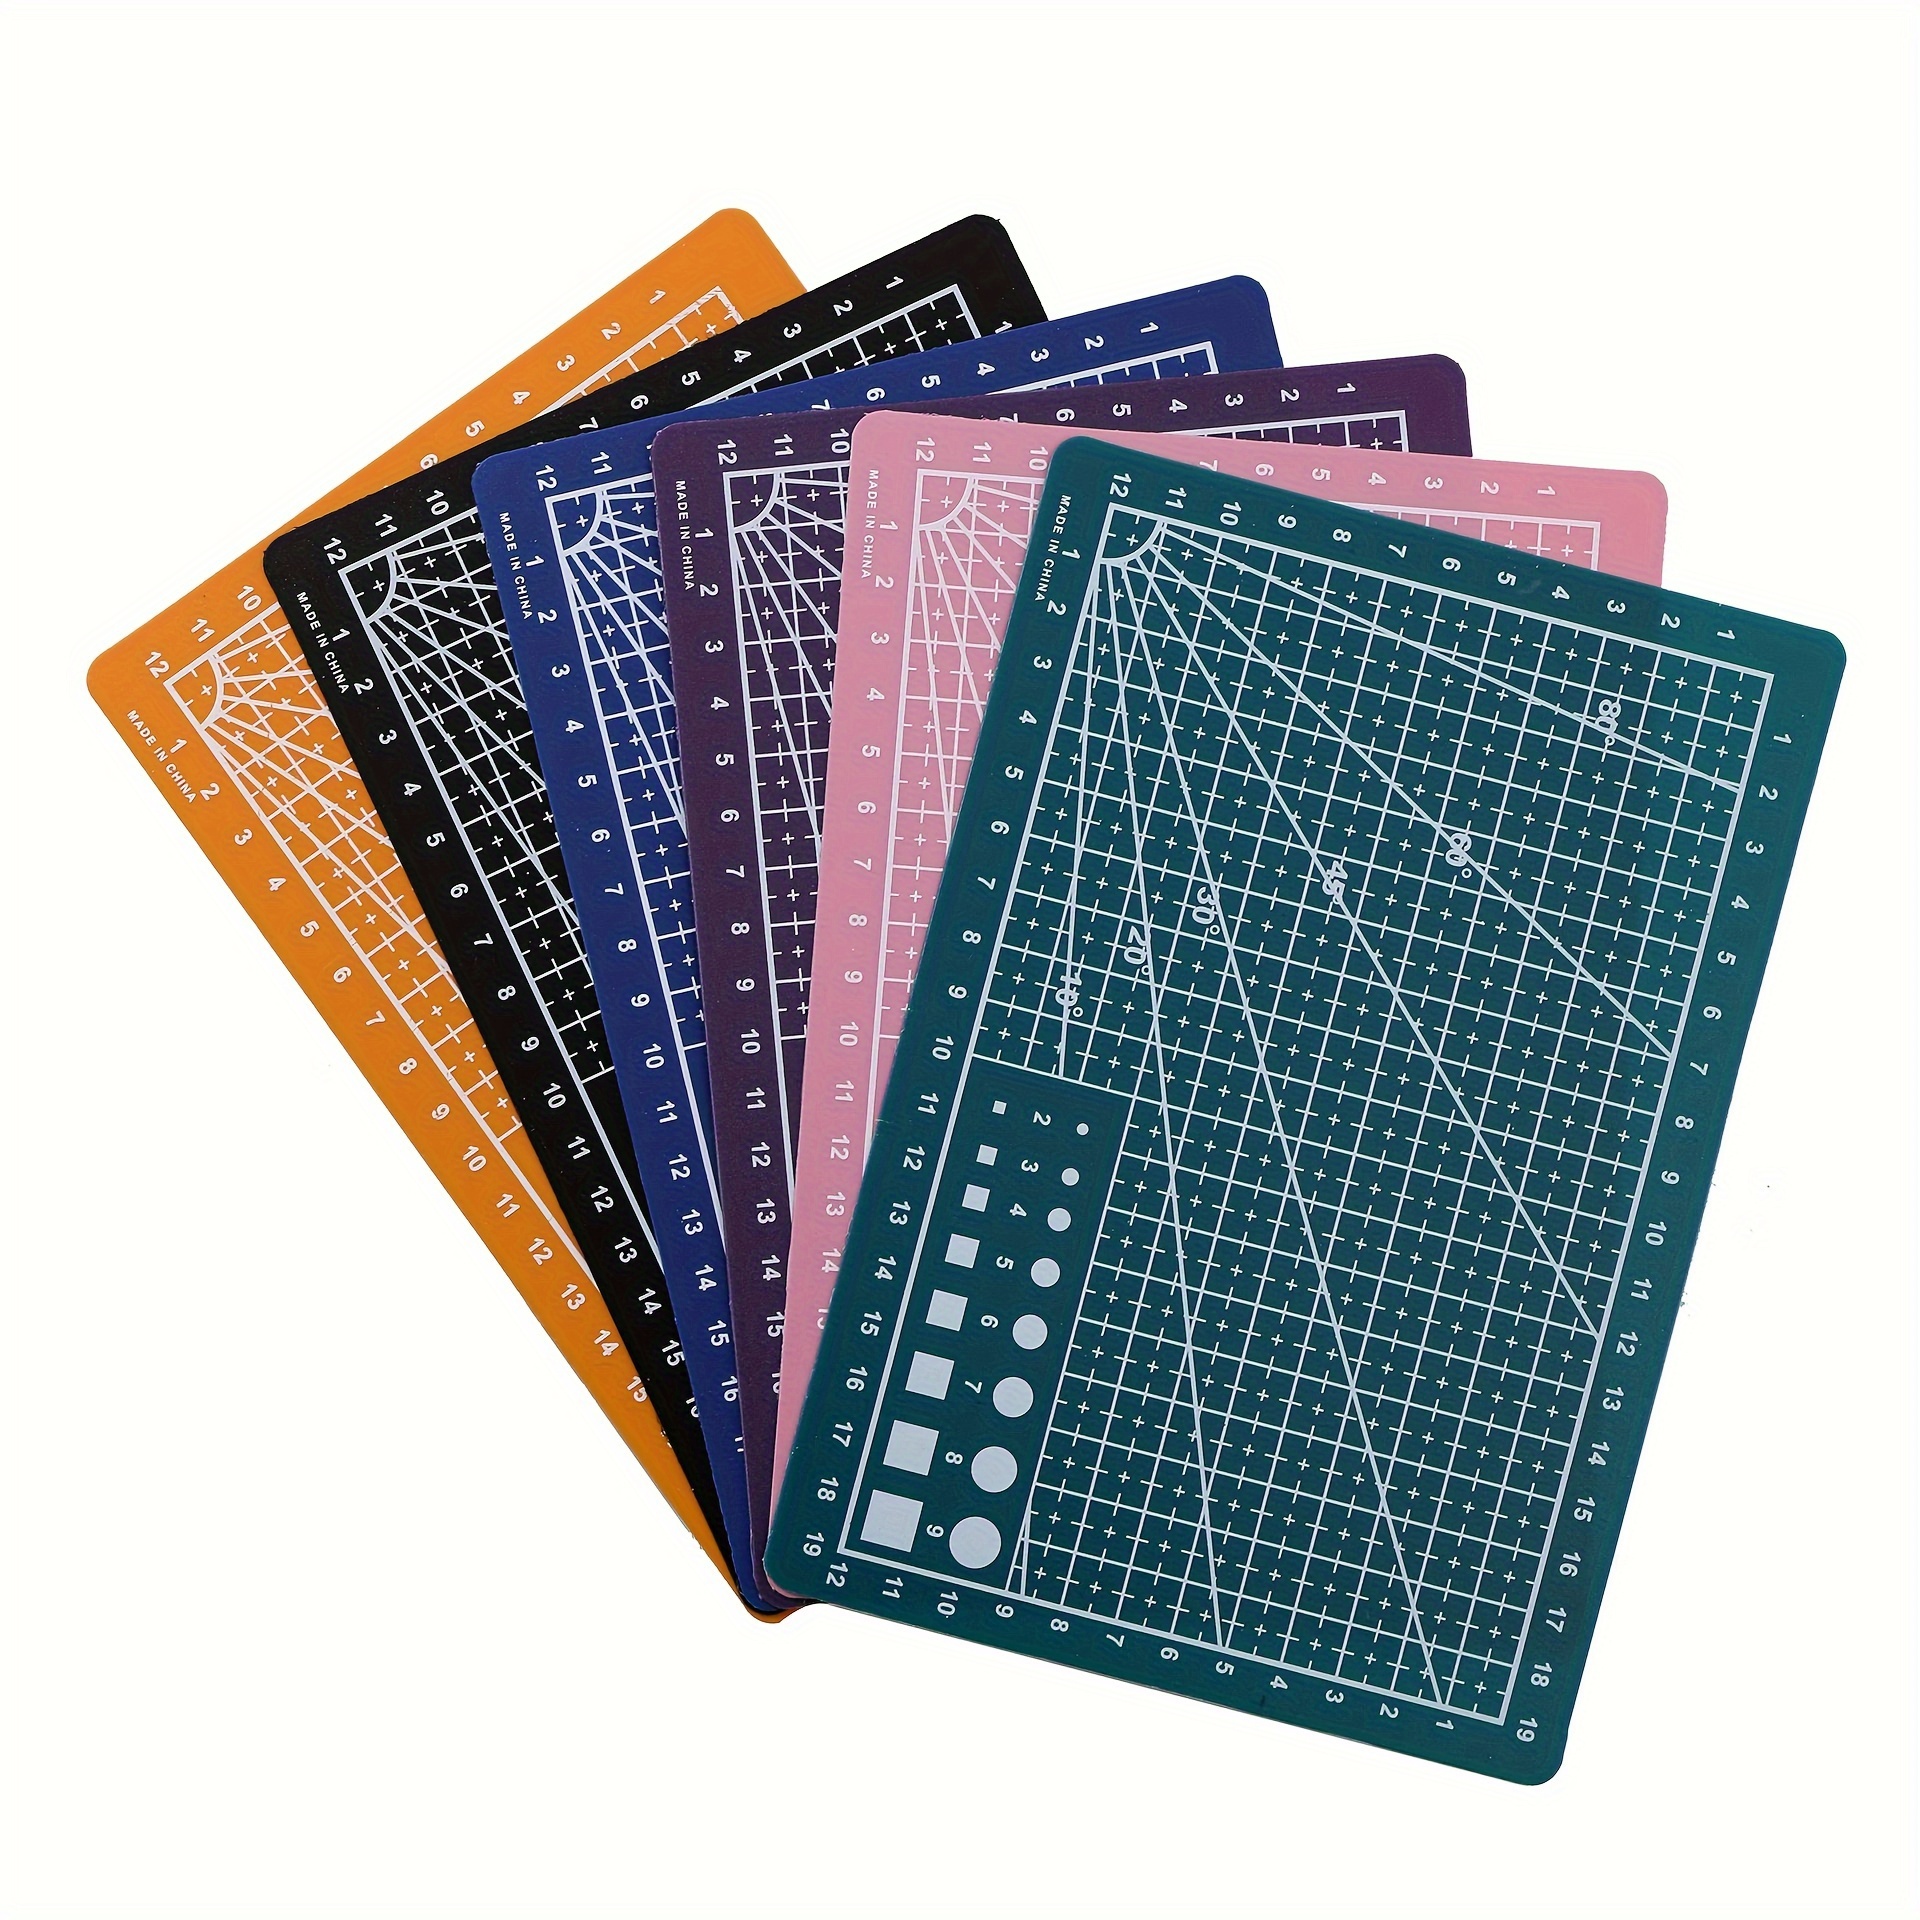 1PC A4/A5 Double-sided Grid Lines Cutting Board Self-healing DIY Craft  Cutting Mat Pad